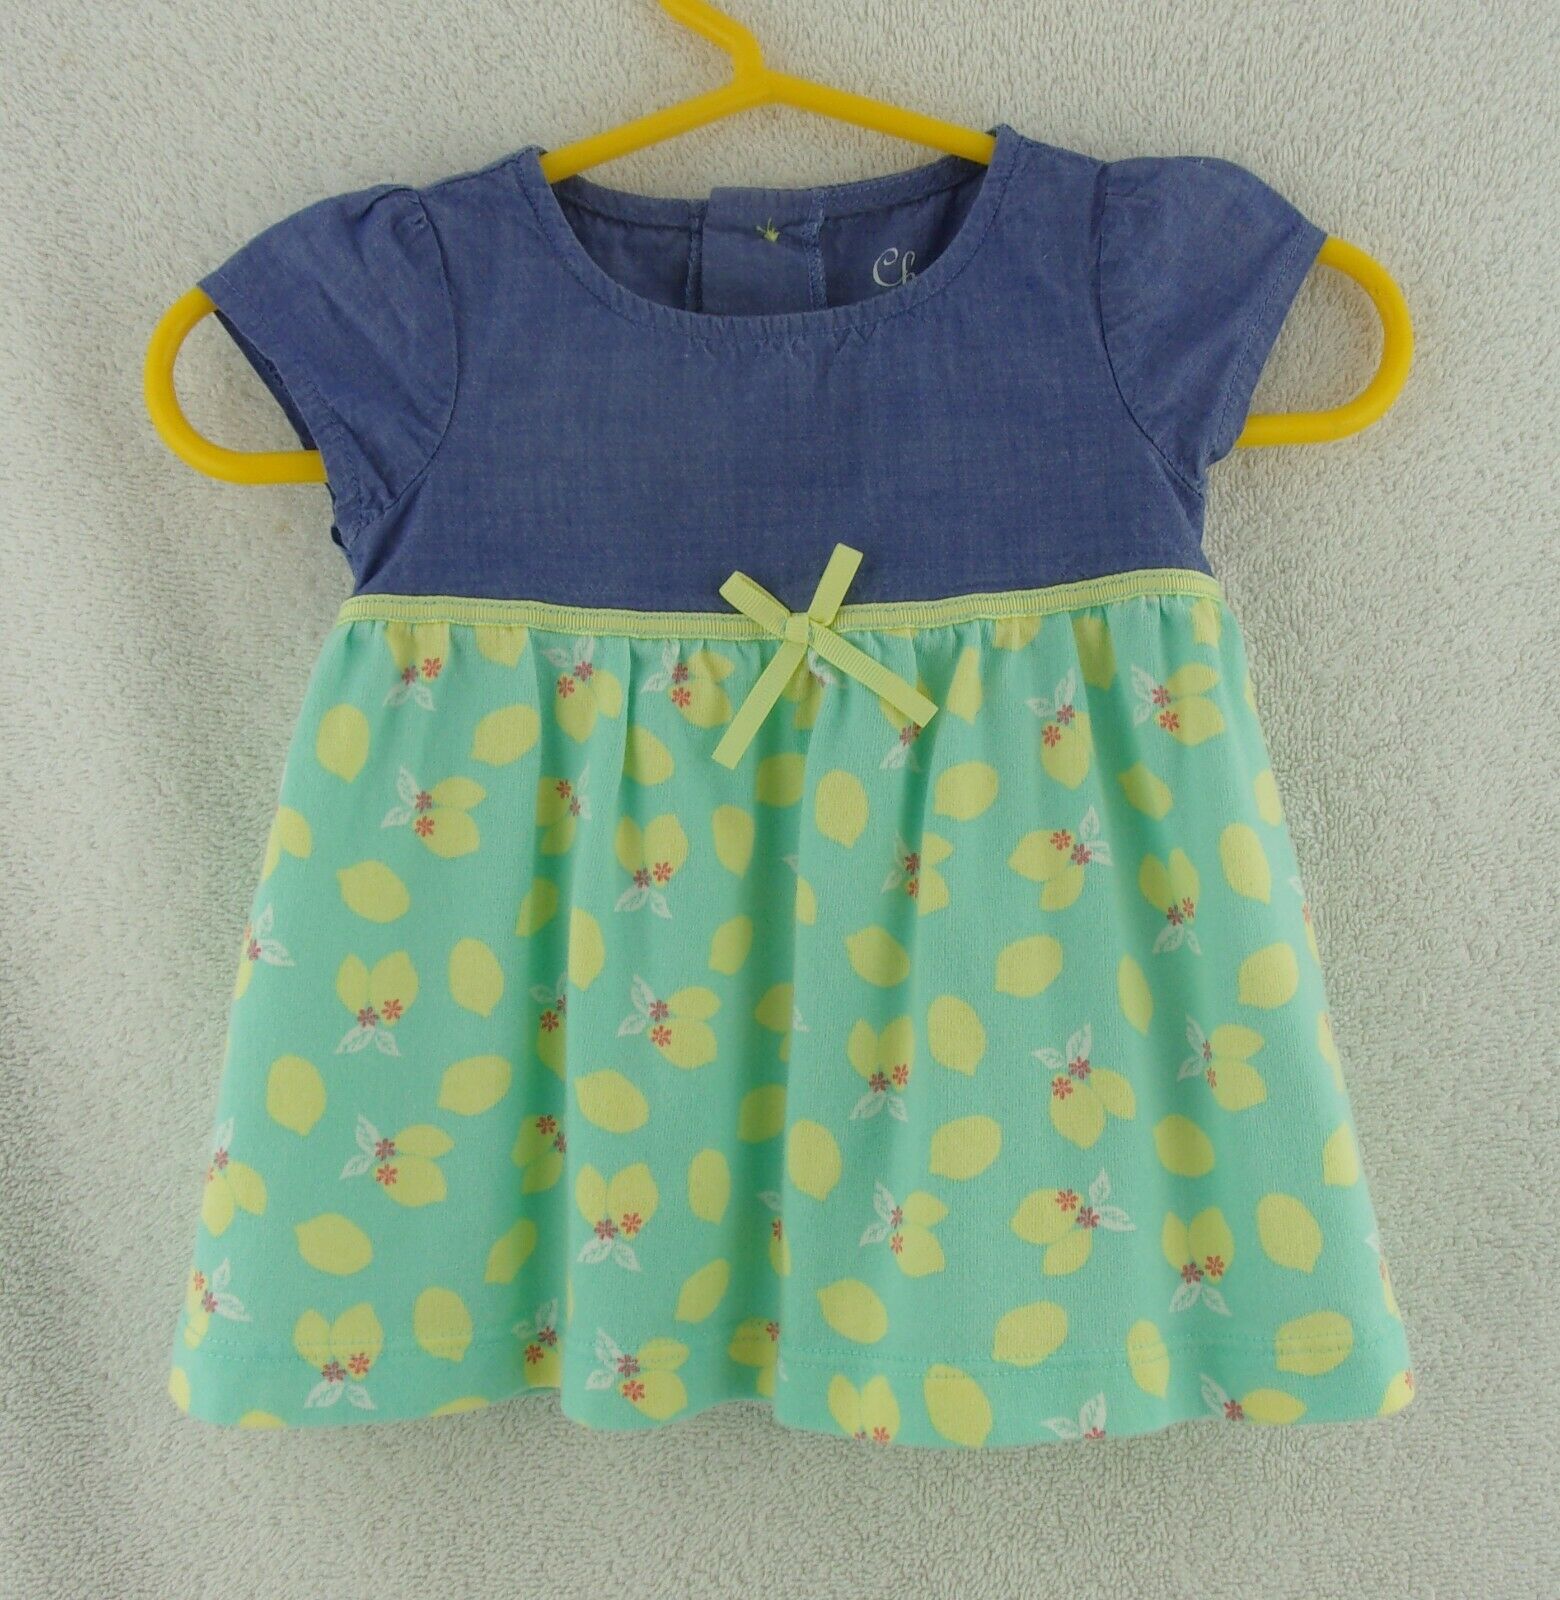 Doll Clothes Cherokee Lemon Print Dress 0-3 Months Infant Outfit 22"-24" Tall